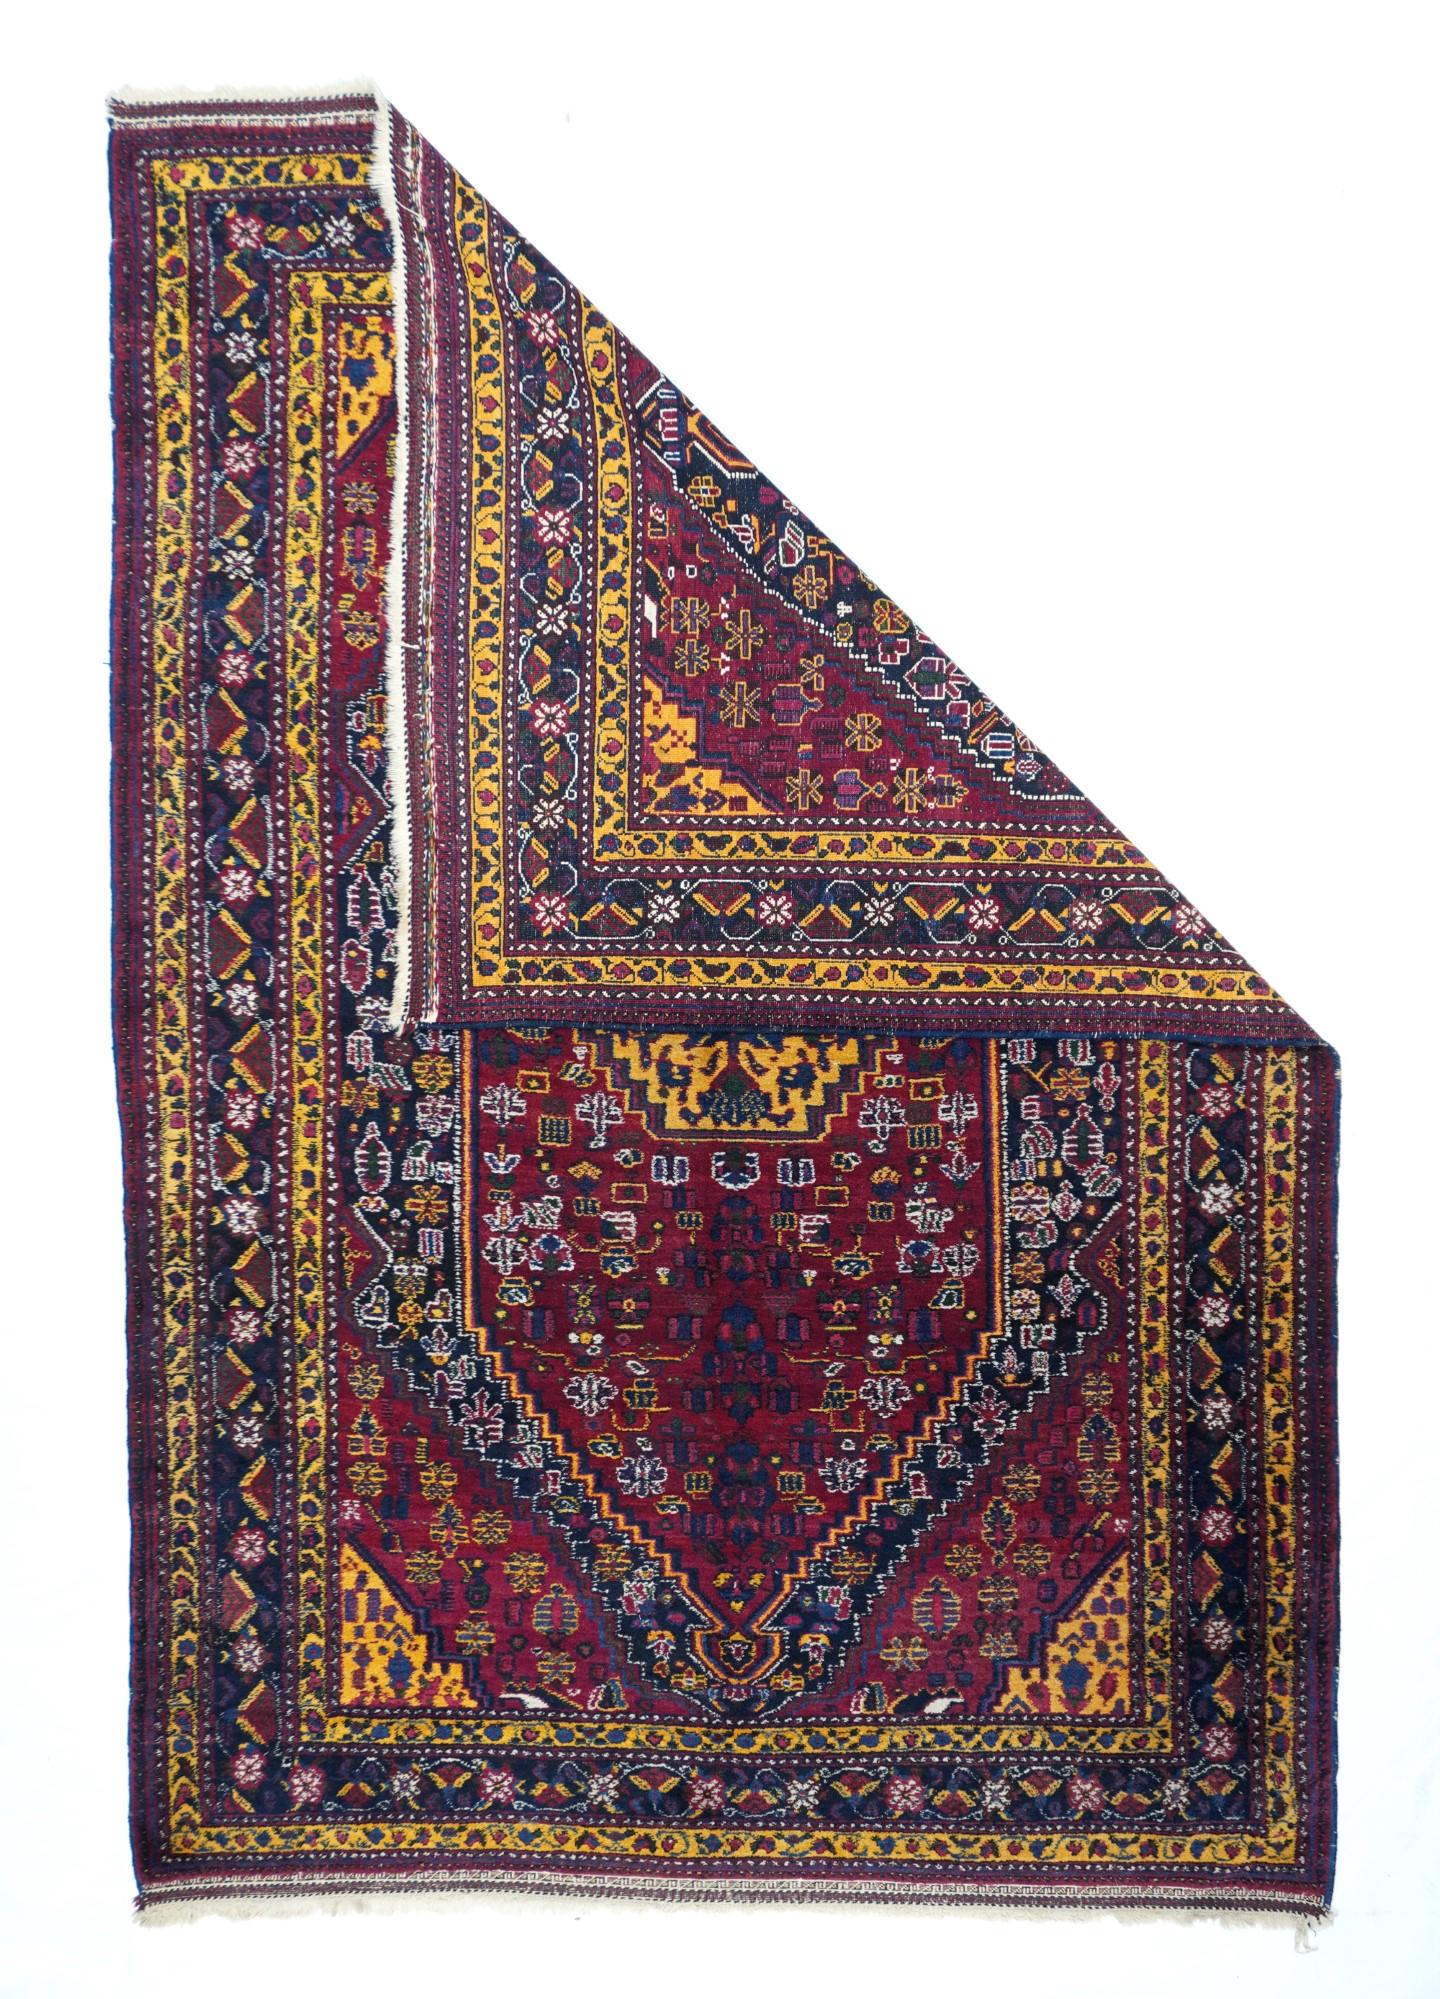 An attractive Persian tribal rug with an outstanding banana yellow in the stepped central medallion, the triangular corners, the minor borders, and scattered details everywhere, but where is it from?  The red subfield shows small flowers drawn in